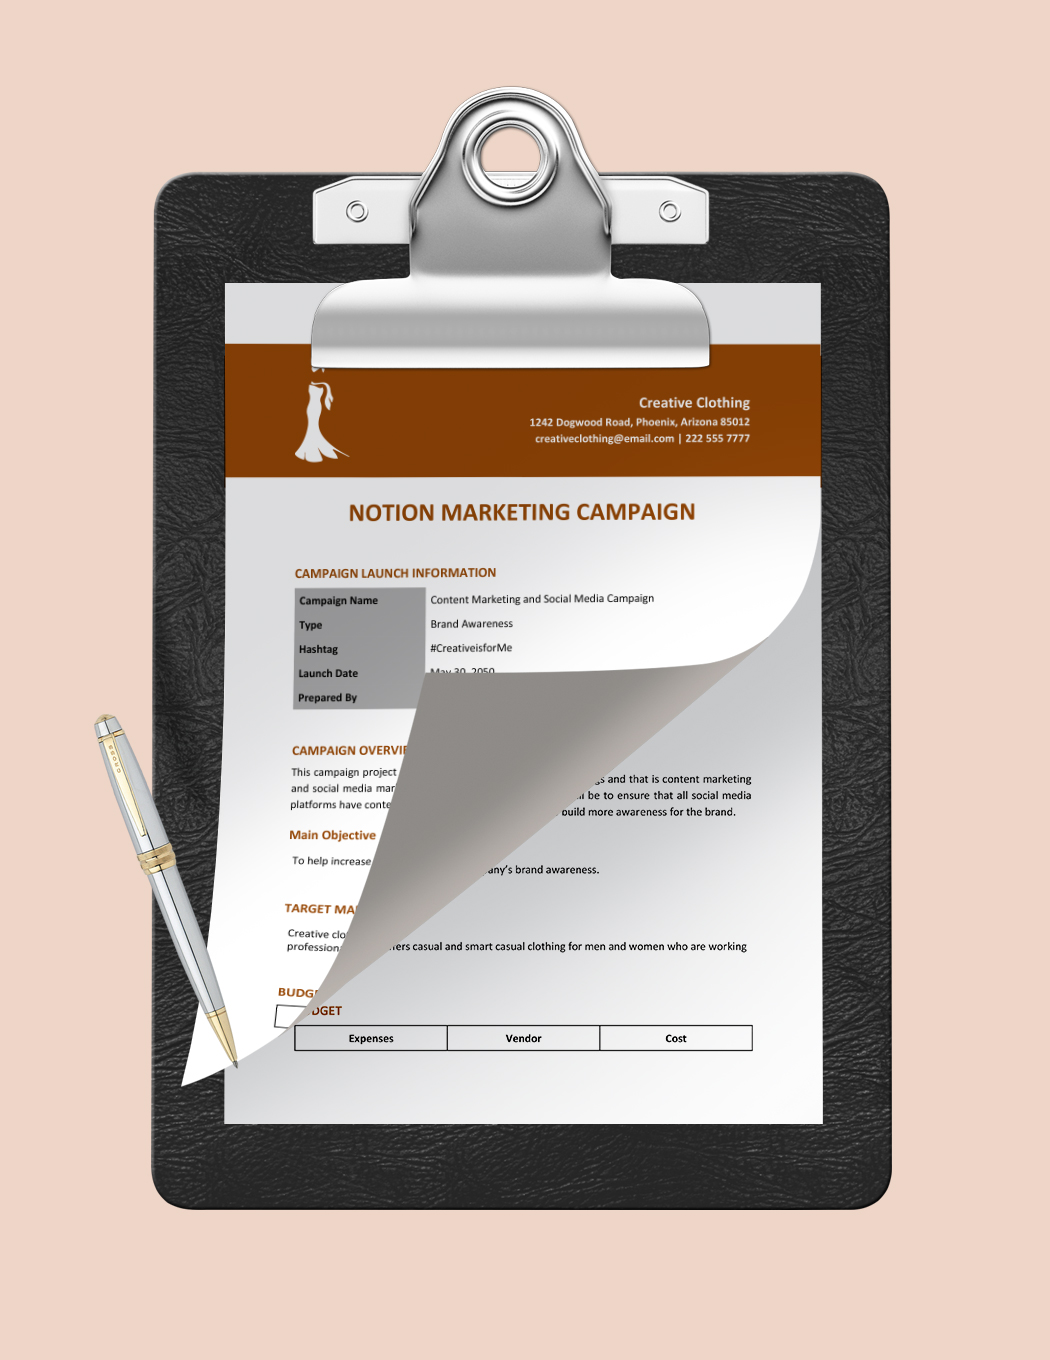 Notion Marketing Campaign Template Download in Word, Google Docs